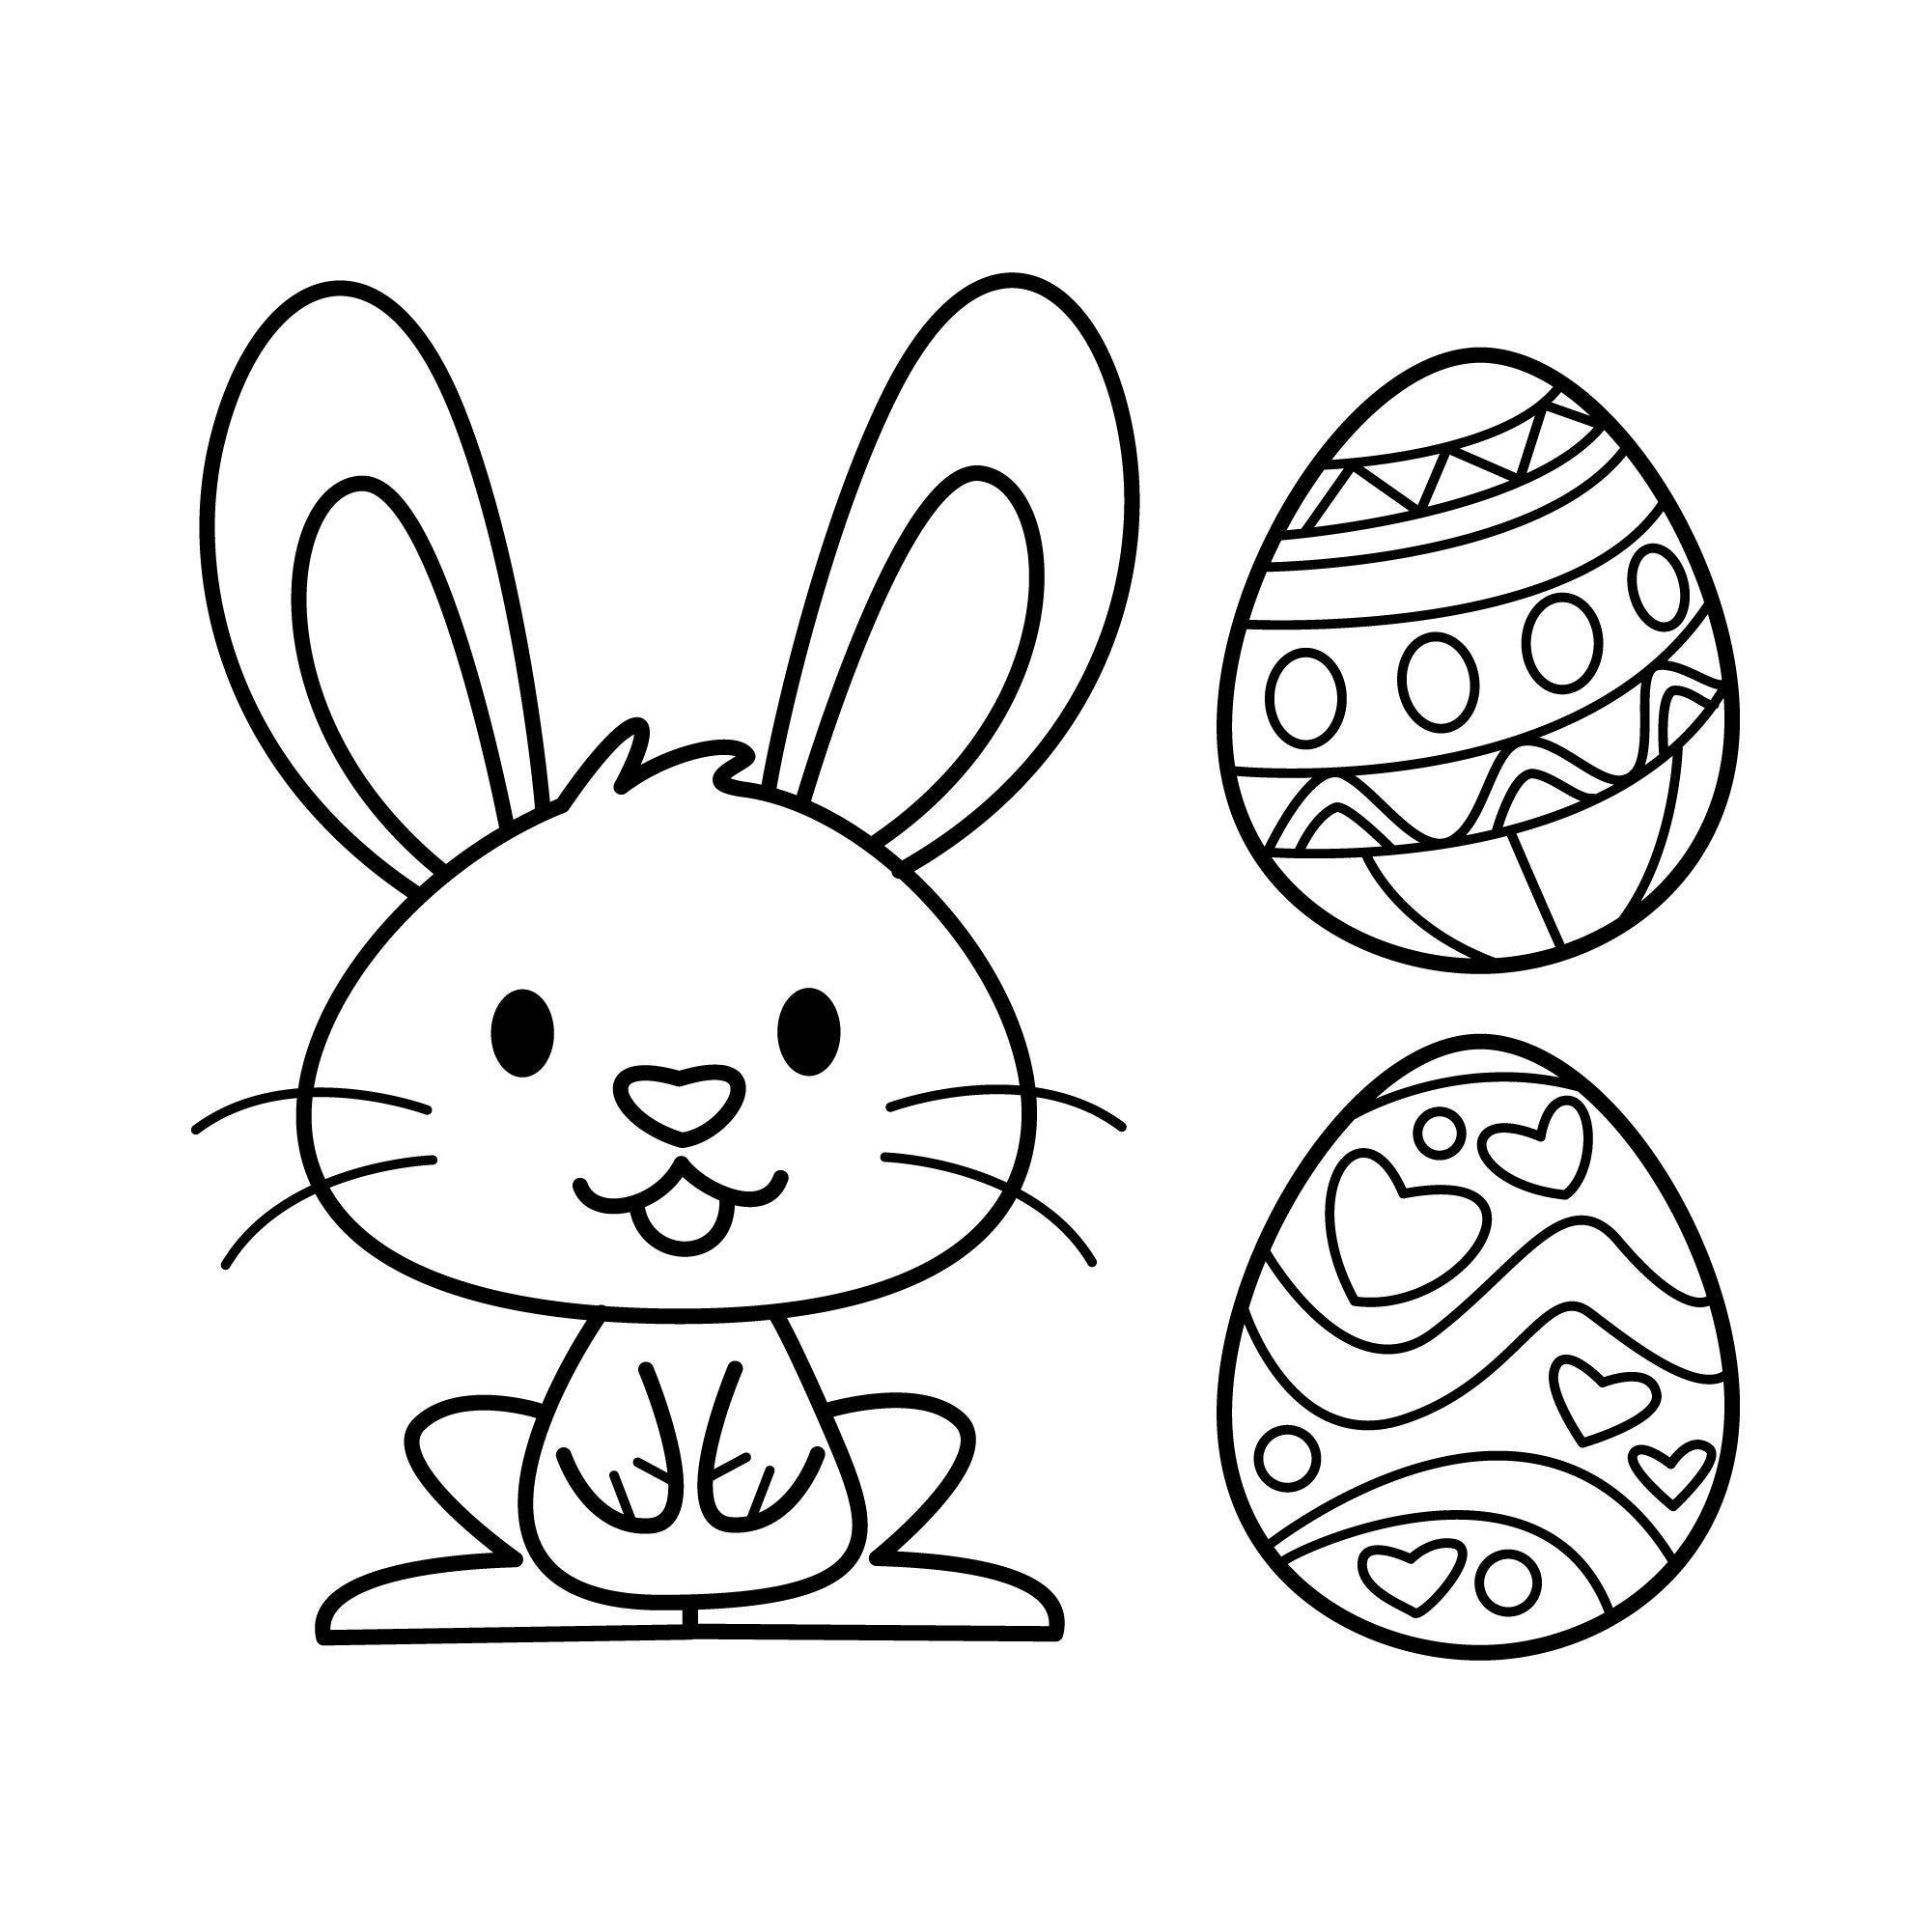 Printable digital cute easter bunny coloring book for children kids easy pages download now